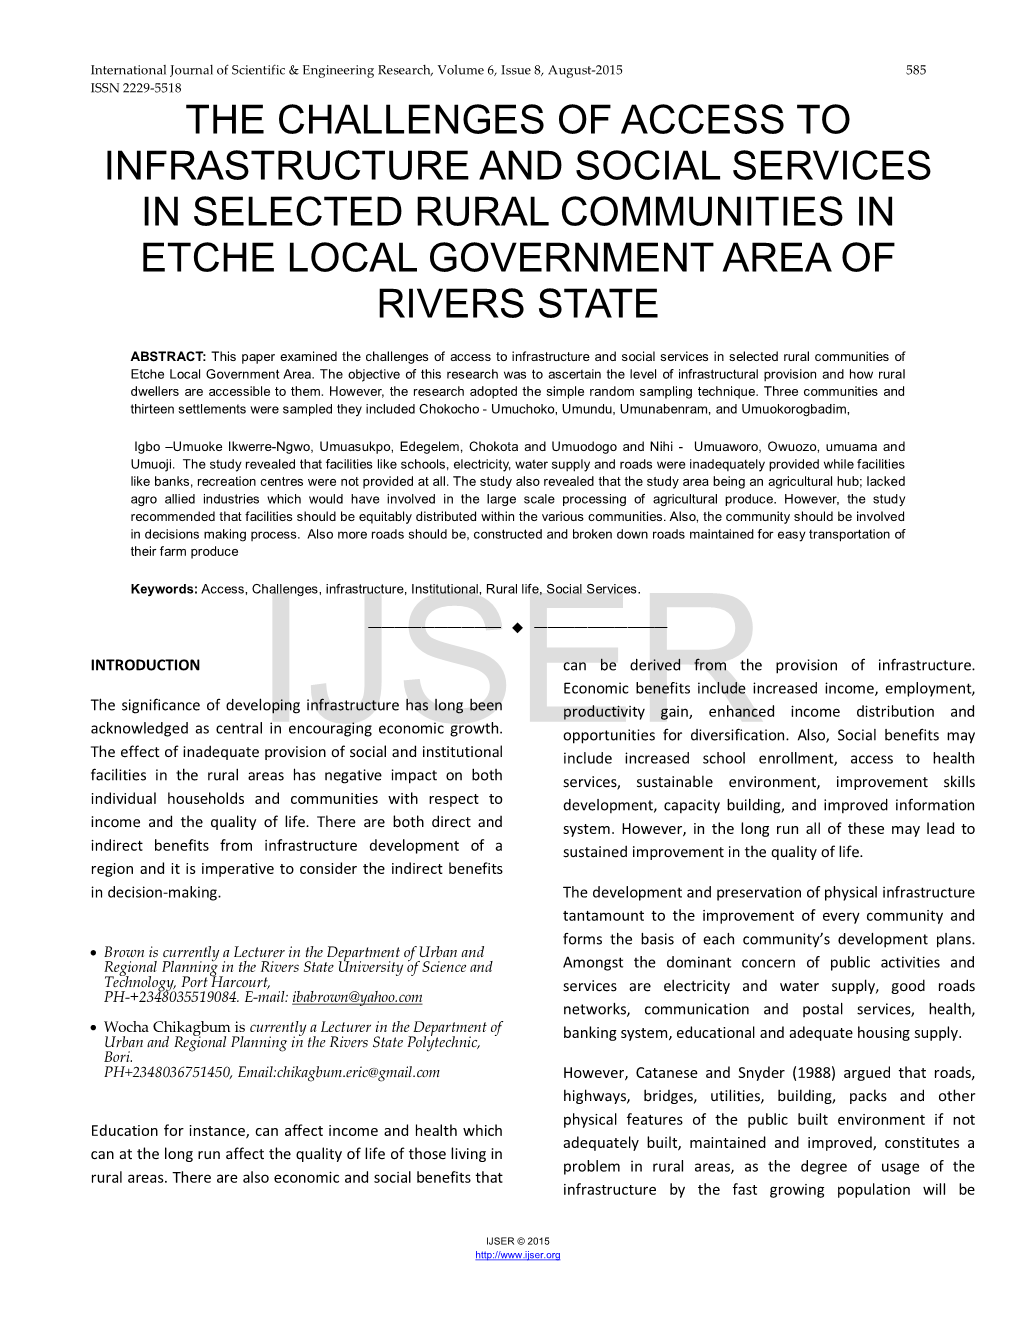 The Challenges of Access to Infrastructure and Social Services in Selected Rural Communities in Etche Local Government Area of Rivers State